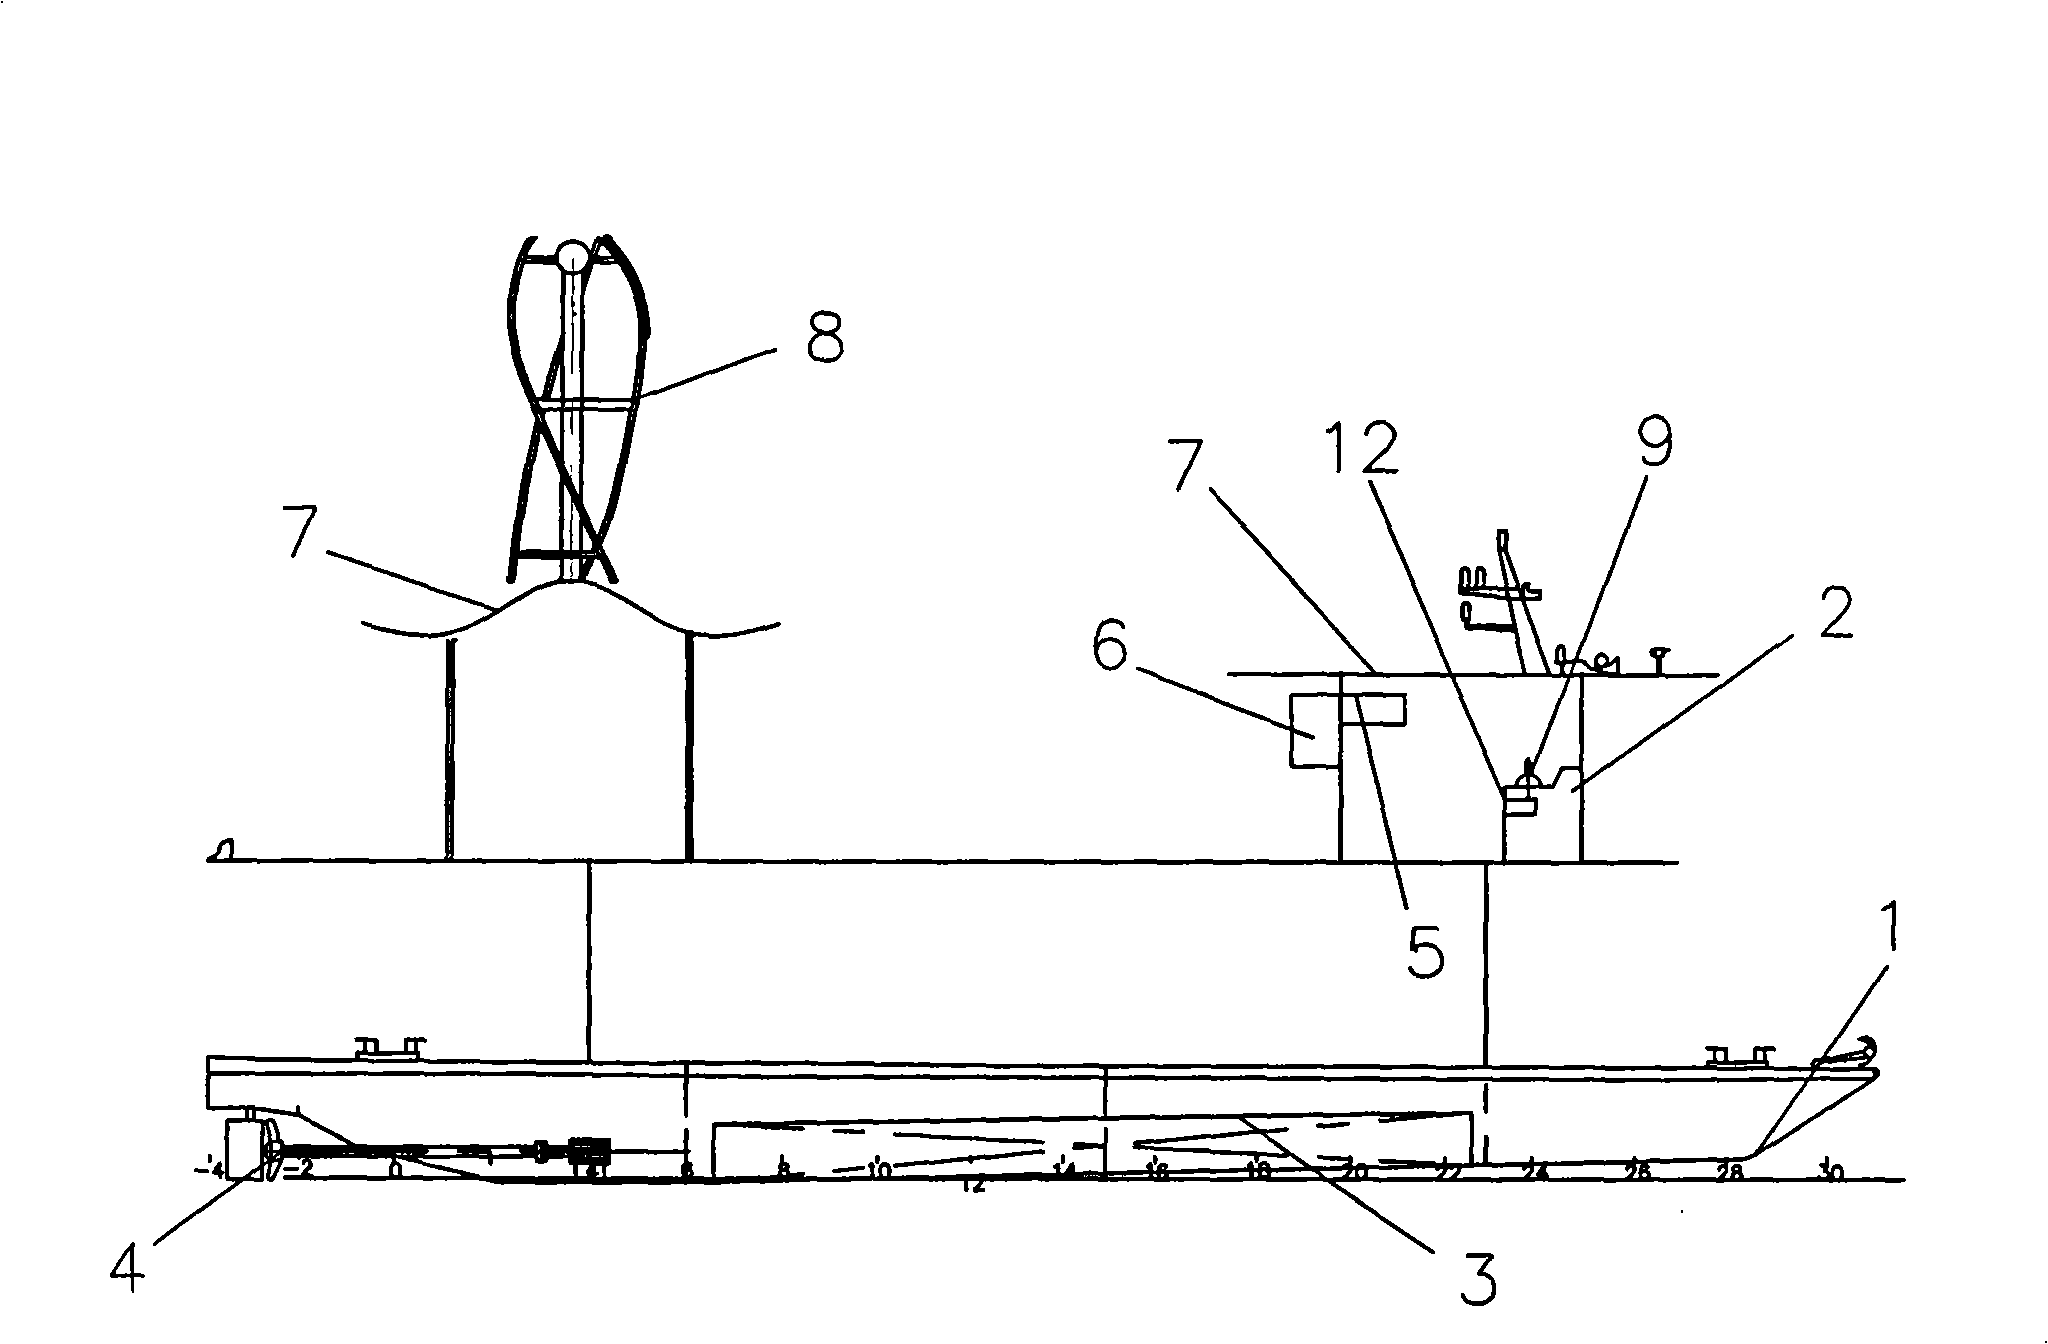 Full electric ship of charging accumulator of wind, light and electricity composite energy resource